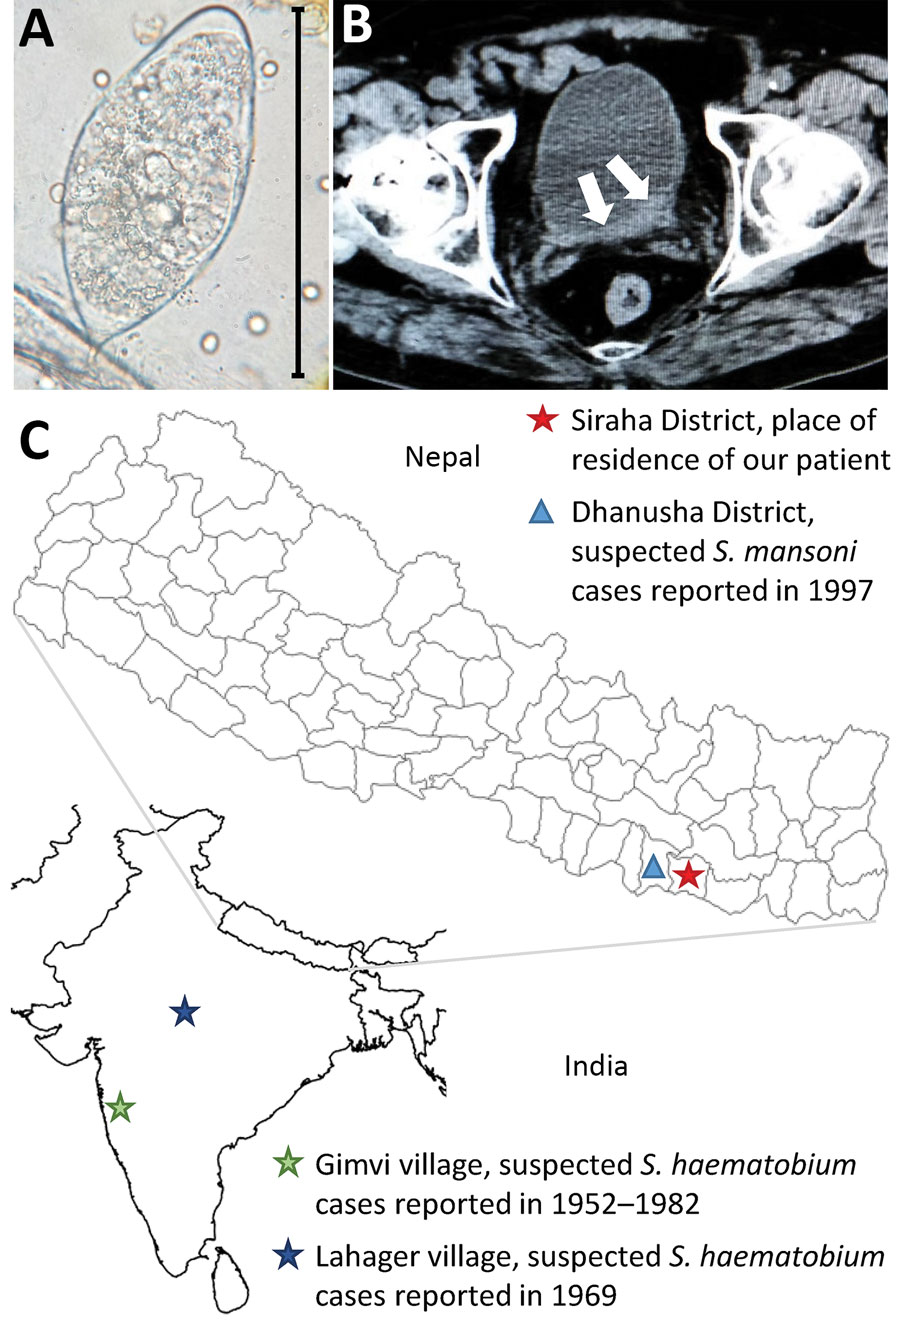 Investigation of urogenital schistosomiasis in a 34-year-old male patient in Nepal. A) Trematode egg, resembling the typical Schistosoma haematobium morphology, detected upon microscopic investigation of patient’s urine sediment. Original magnification ×40. B) Computed tomography image showing bladder wall thickening (white arrows). C) Geographic location of patient’s place of residence and of cases of human schistosomiasis reported previously in India and Nepal.